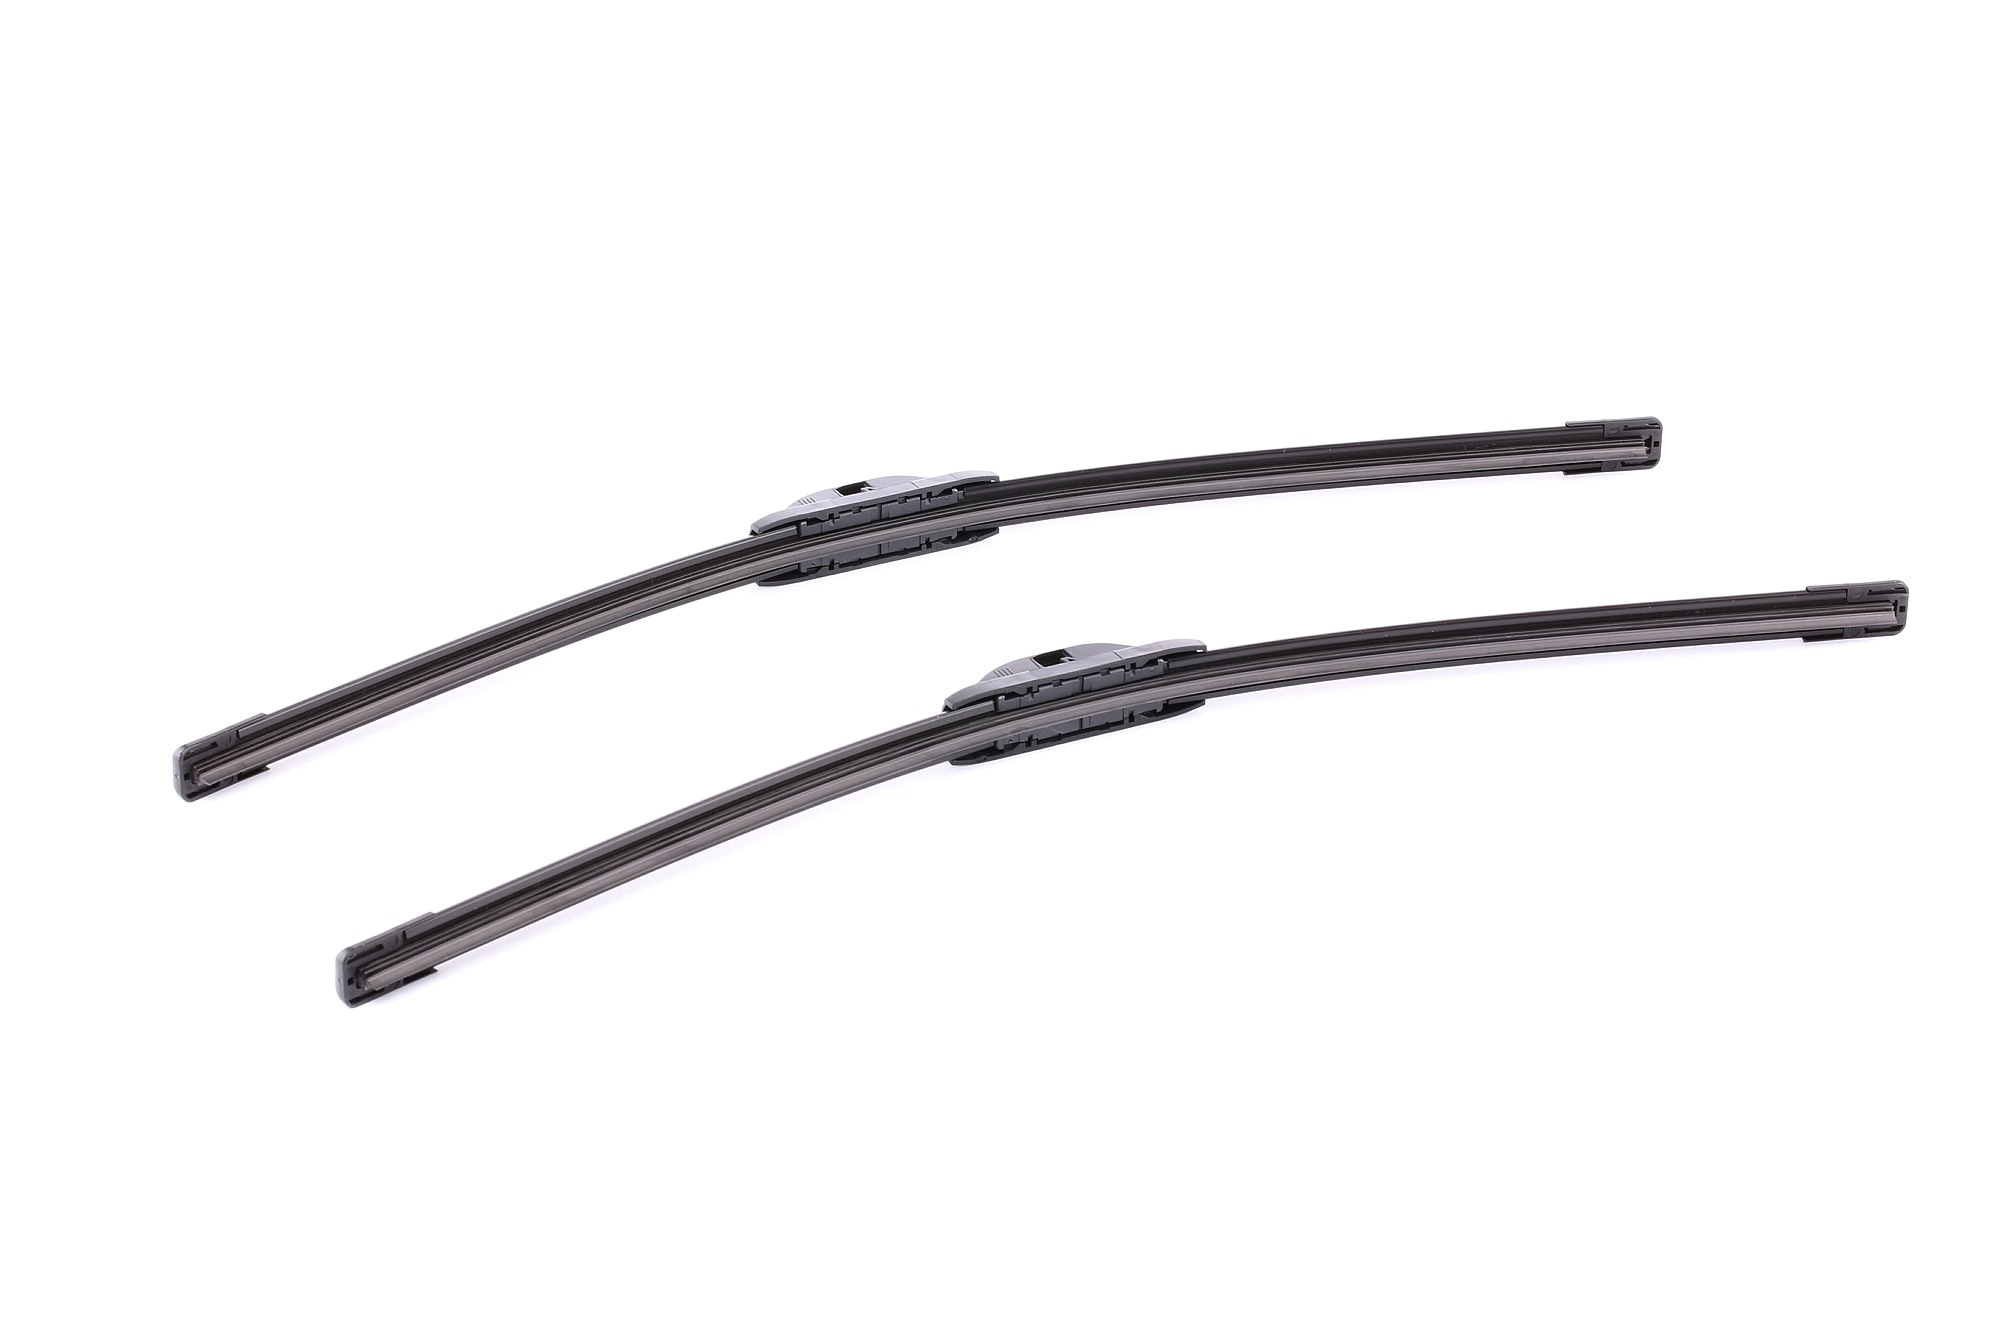 HELLA 9XW 863 875-801 Wiper blade 550/550 mm Front, Flat wiper blade, for left-hand drive vehicles, 22/22 Inch